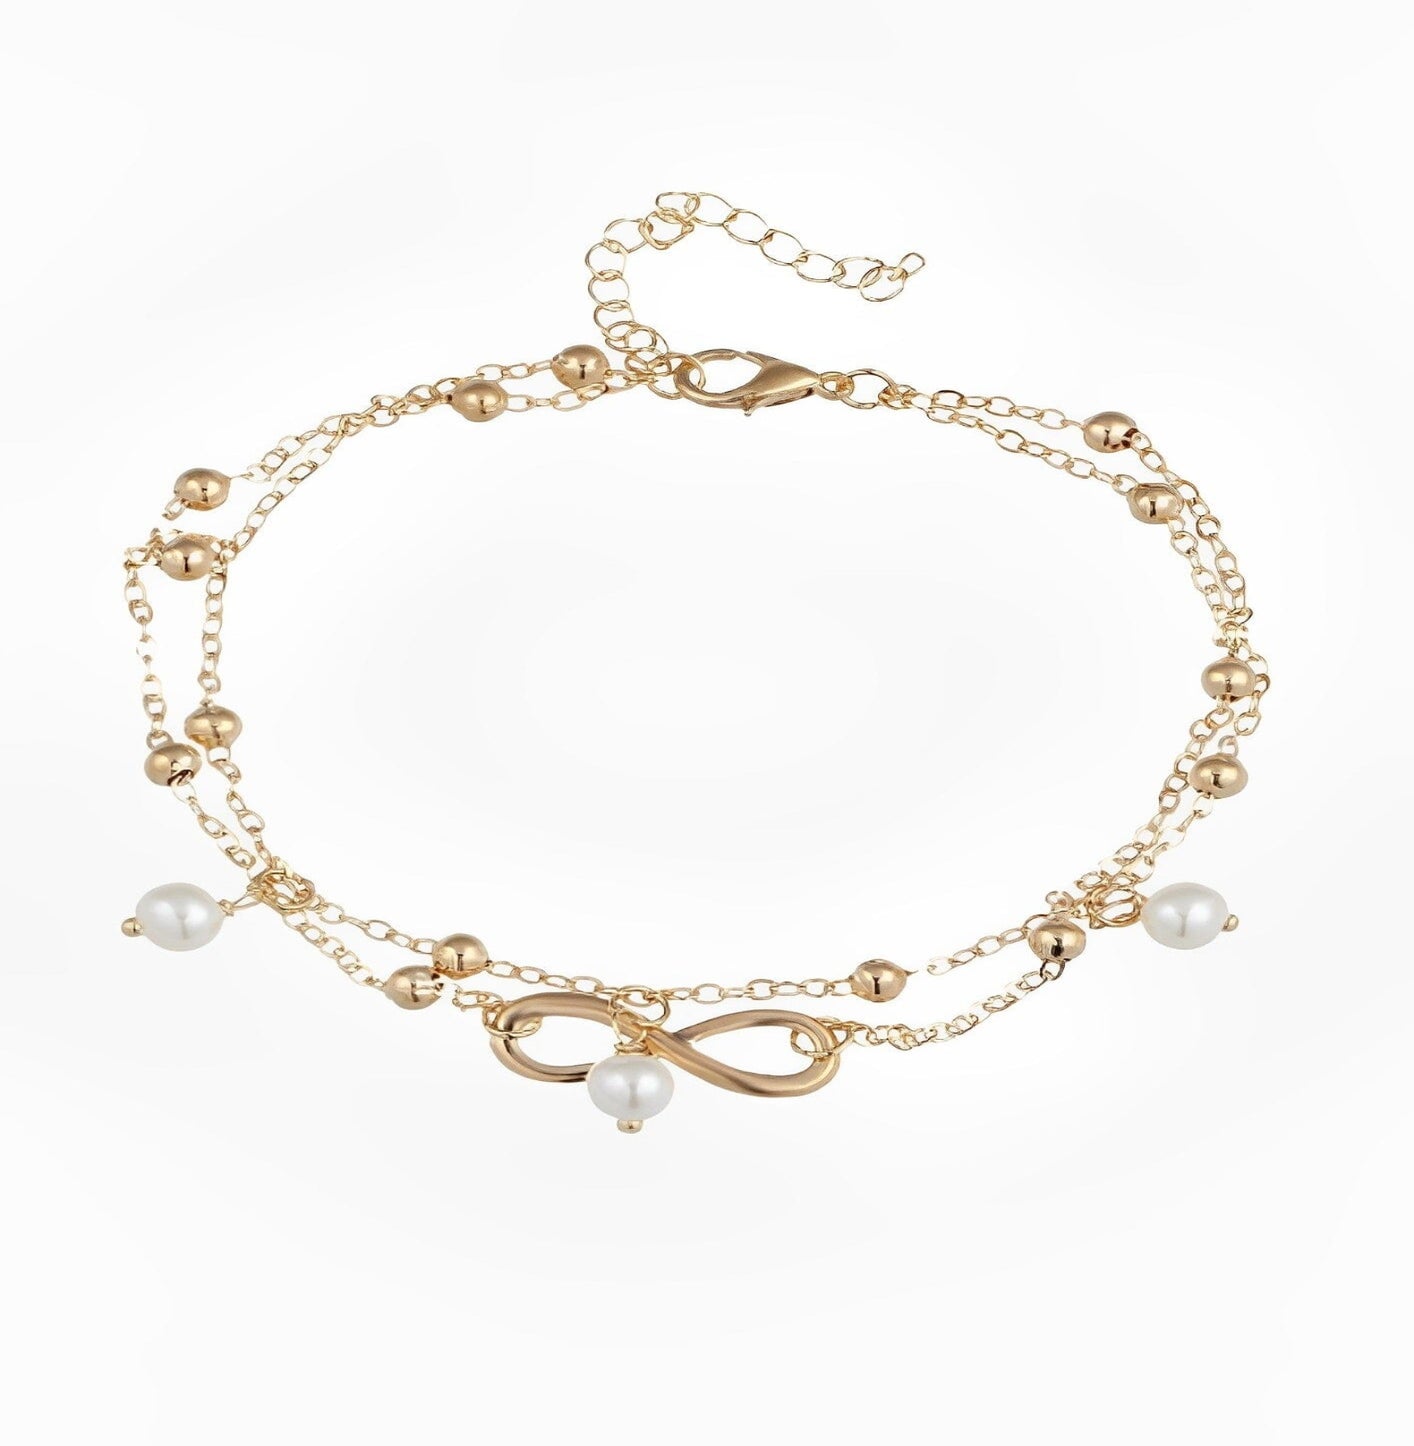 EMBER BRACELET ering Yubama Jewelry Online Store - The Elegant Designs of Gold and Silver ! 